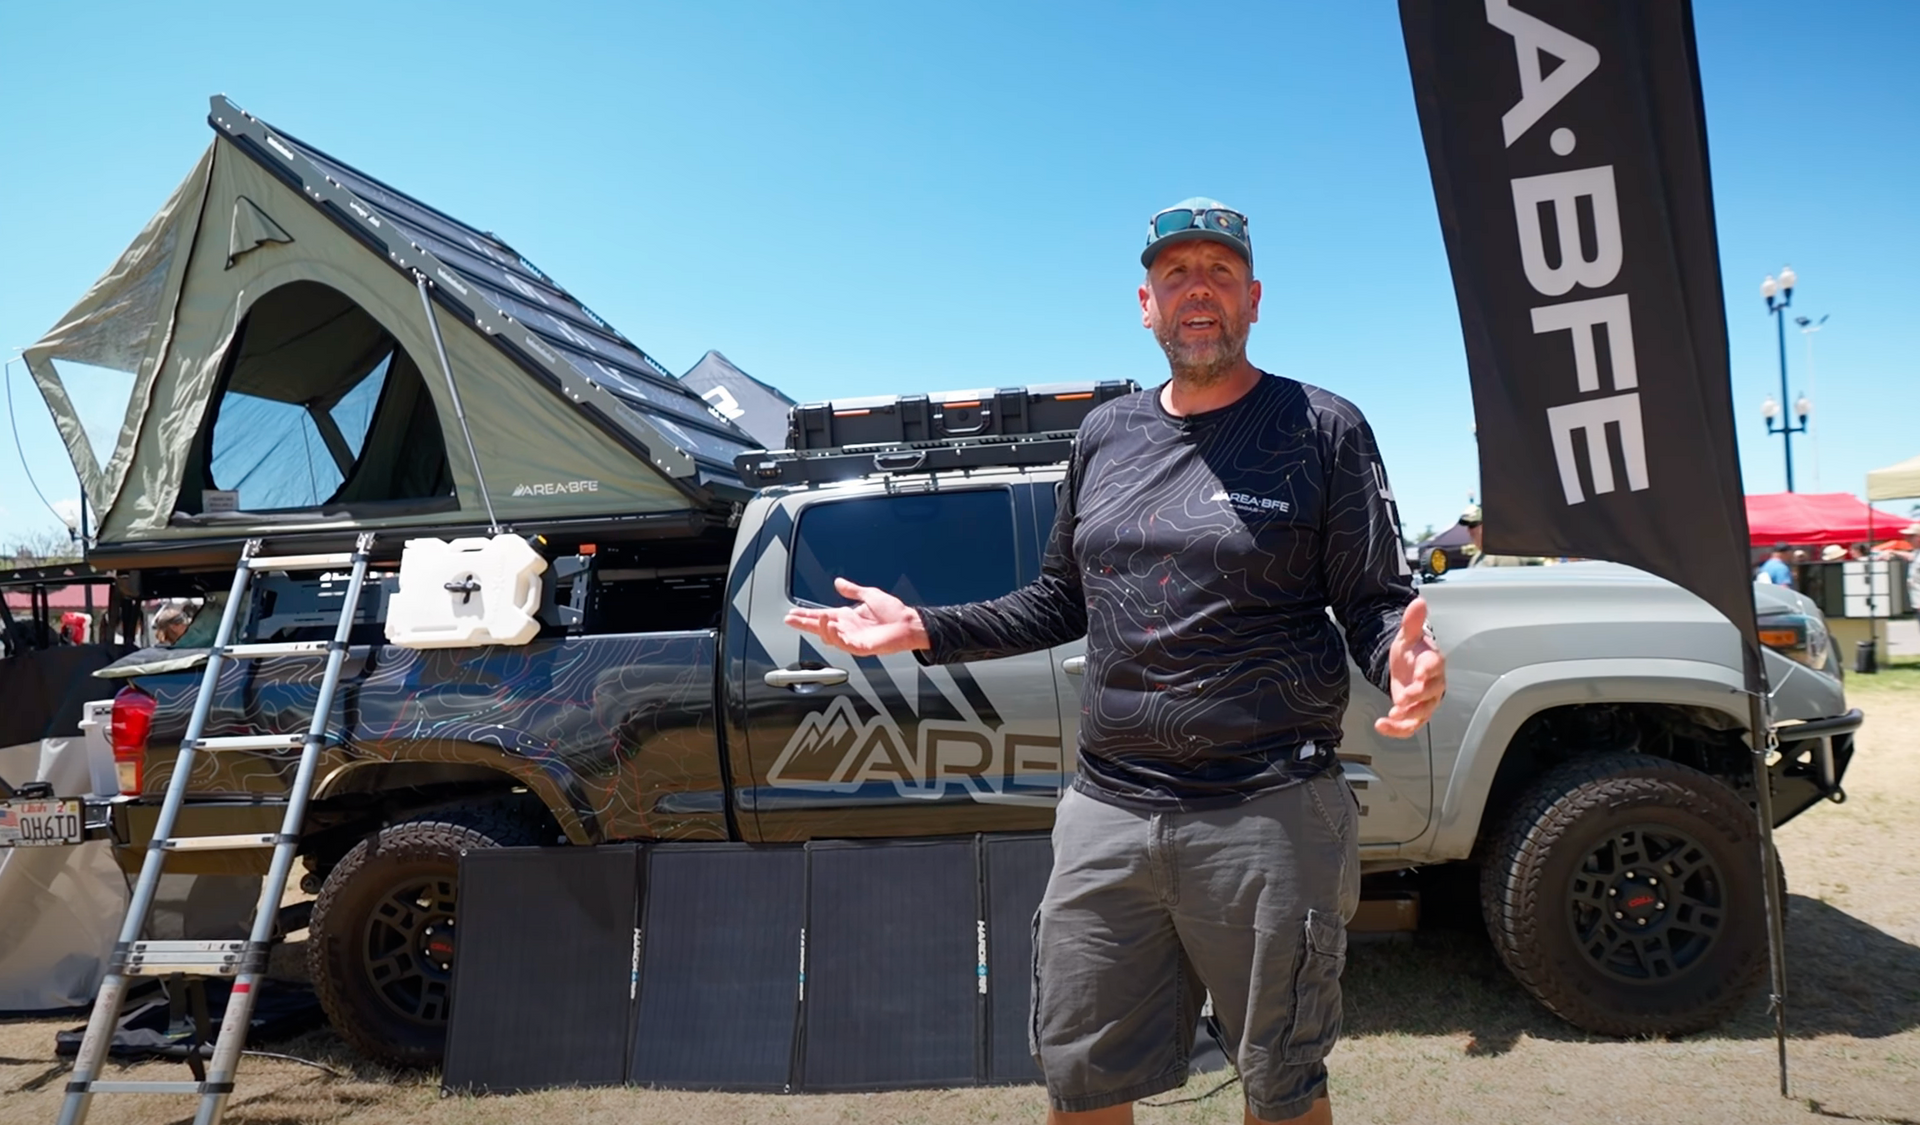 Load video: AreaBFE Tents Black Series rooftop hardshell tent review by intents-adventures